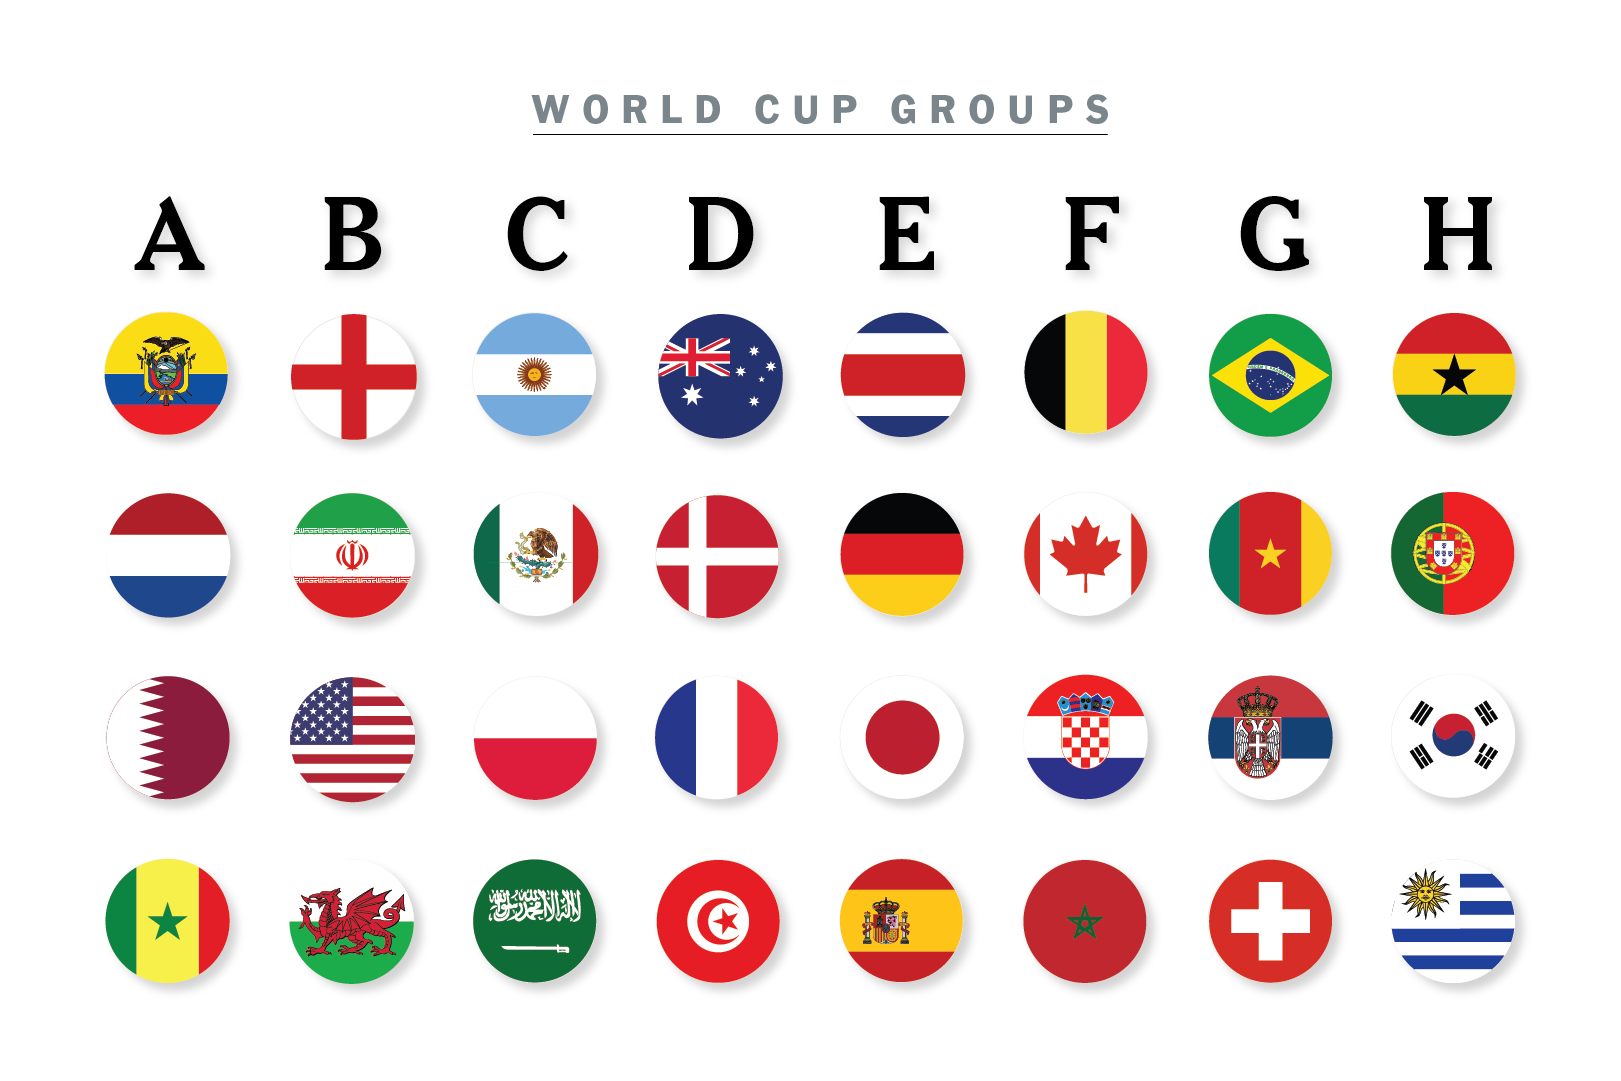 Download Qualifying Groups For World Cup 2022 Gif  Prefierofernandez